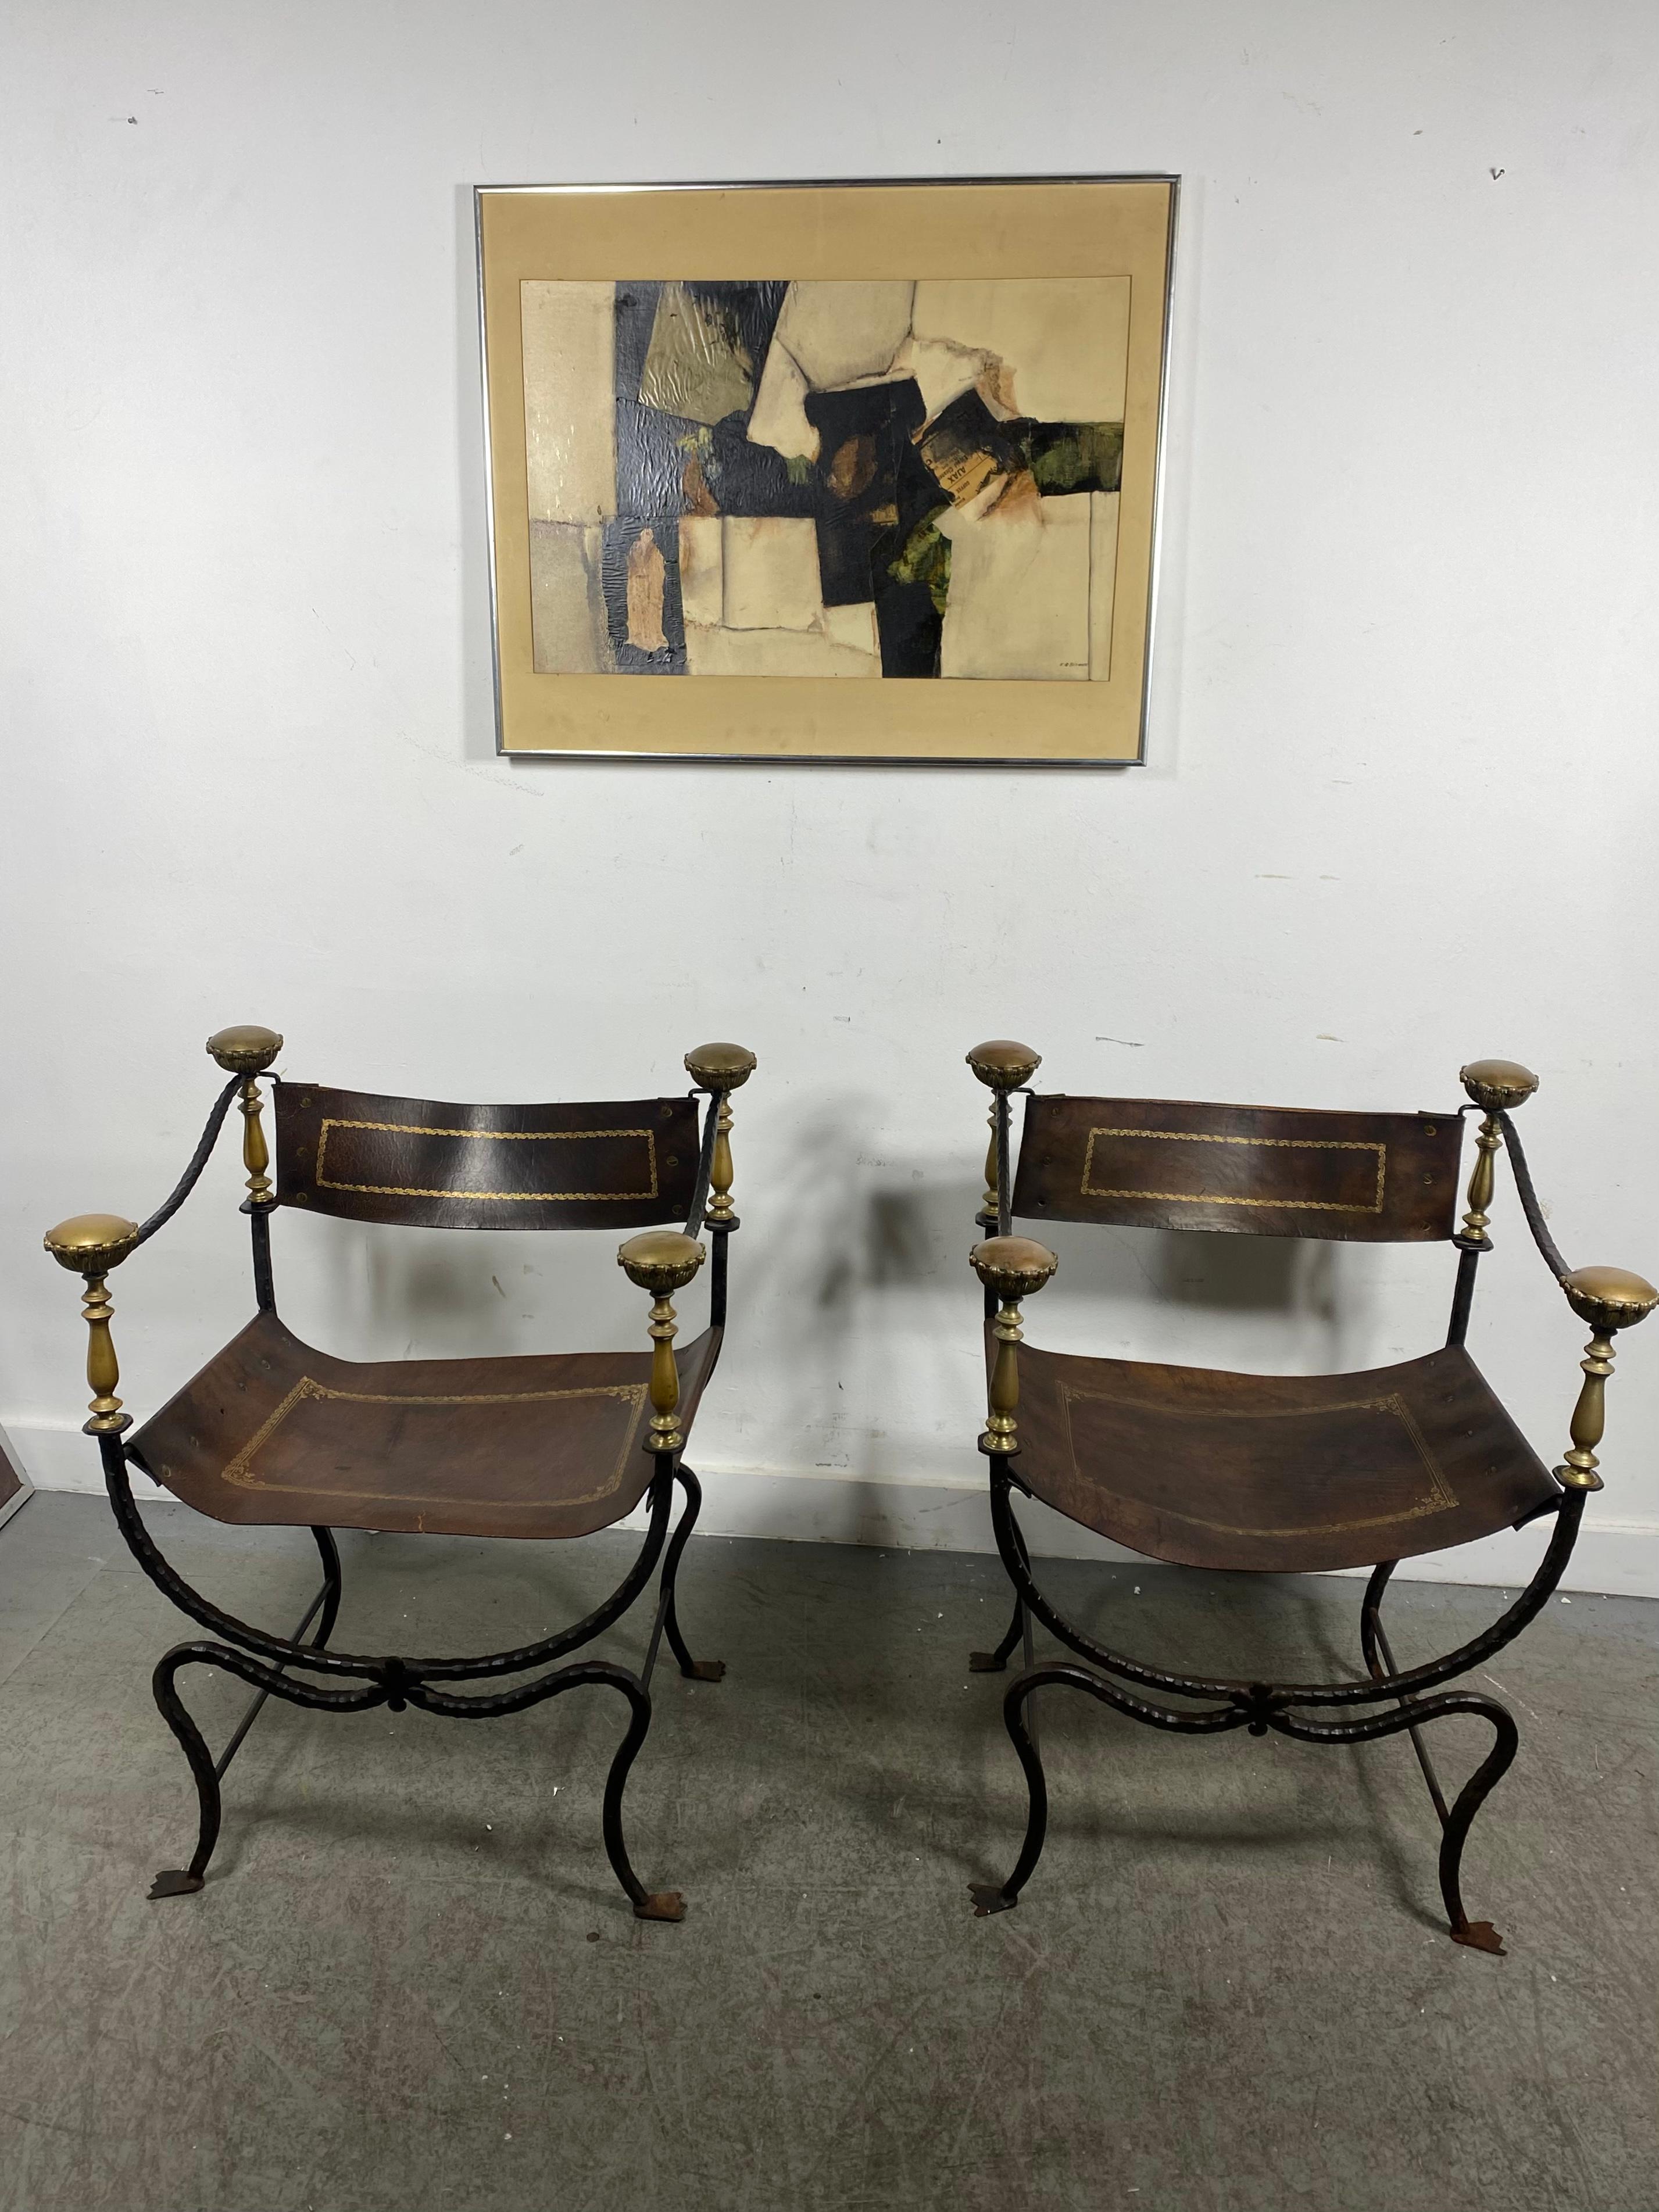 Pair of 20th century Italian iron ,bronze and leather Savonarola chairs,, Retain original tooled leather seats and backs,, minor tear to one chair (see photo). also a few missing grommets.Iron frames showing minor rust,, Hand delivery avail to New